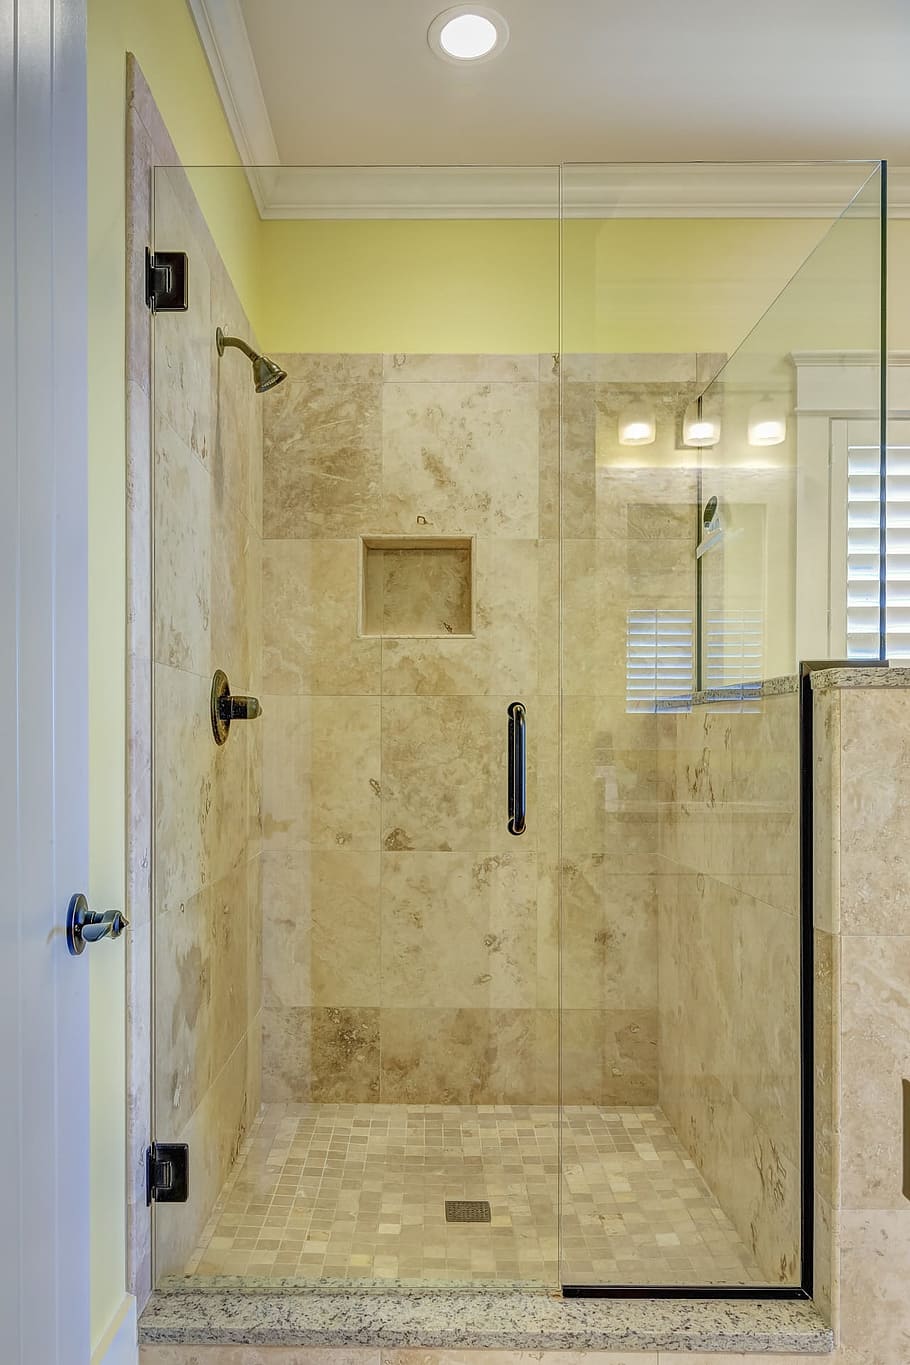 closeup, clear, glass shower stall, glass, shower, stall, tile, bathroom, interior, luxury